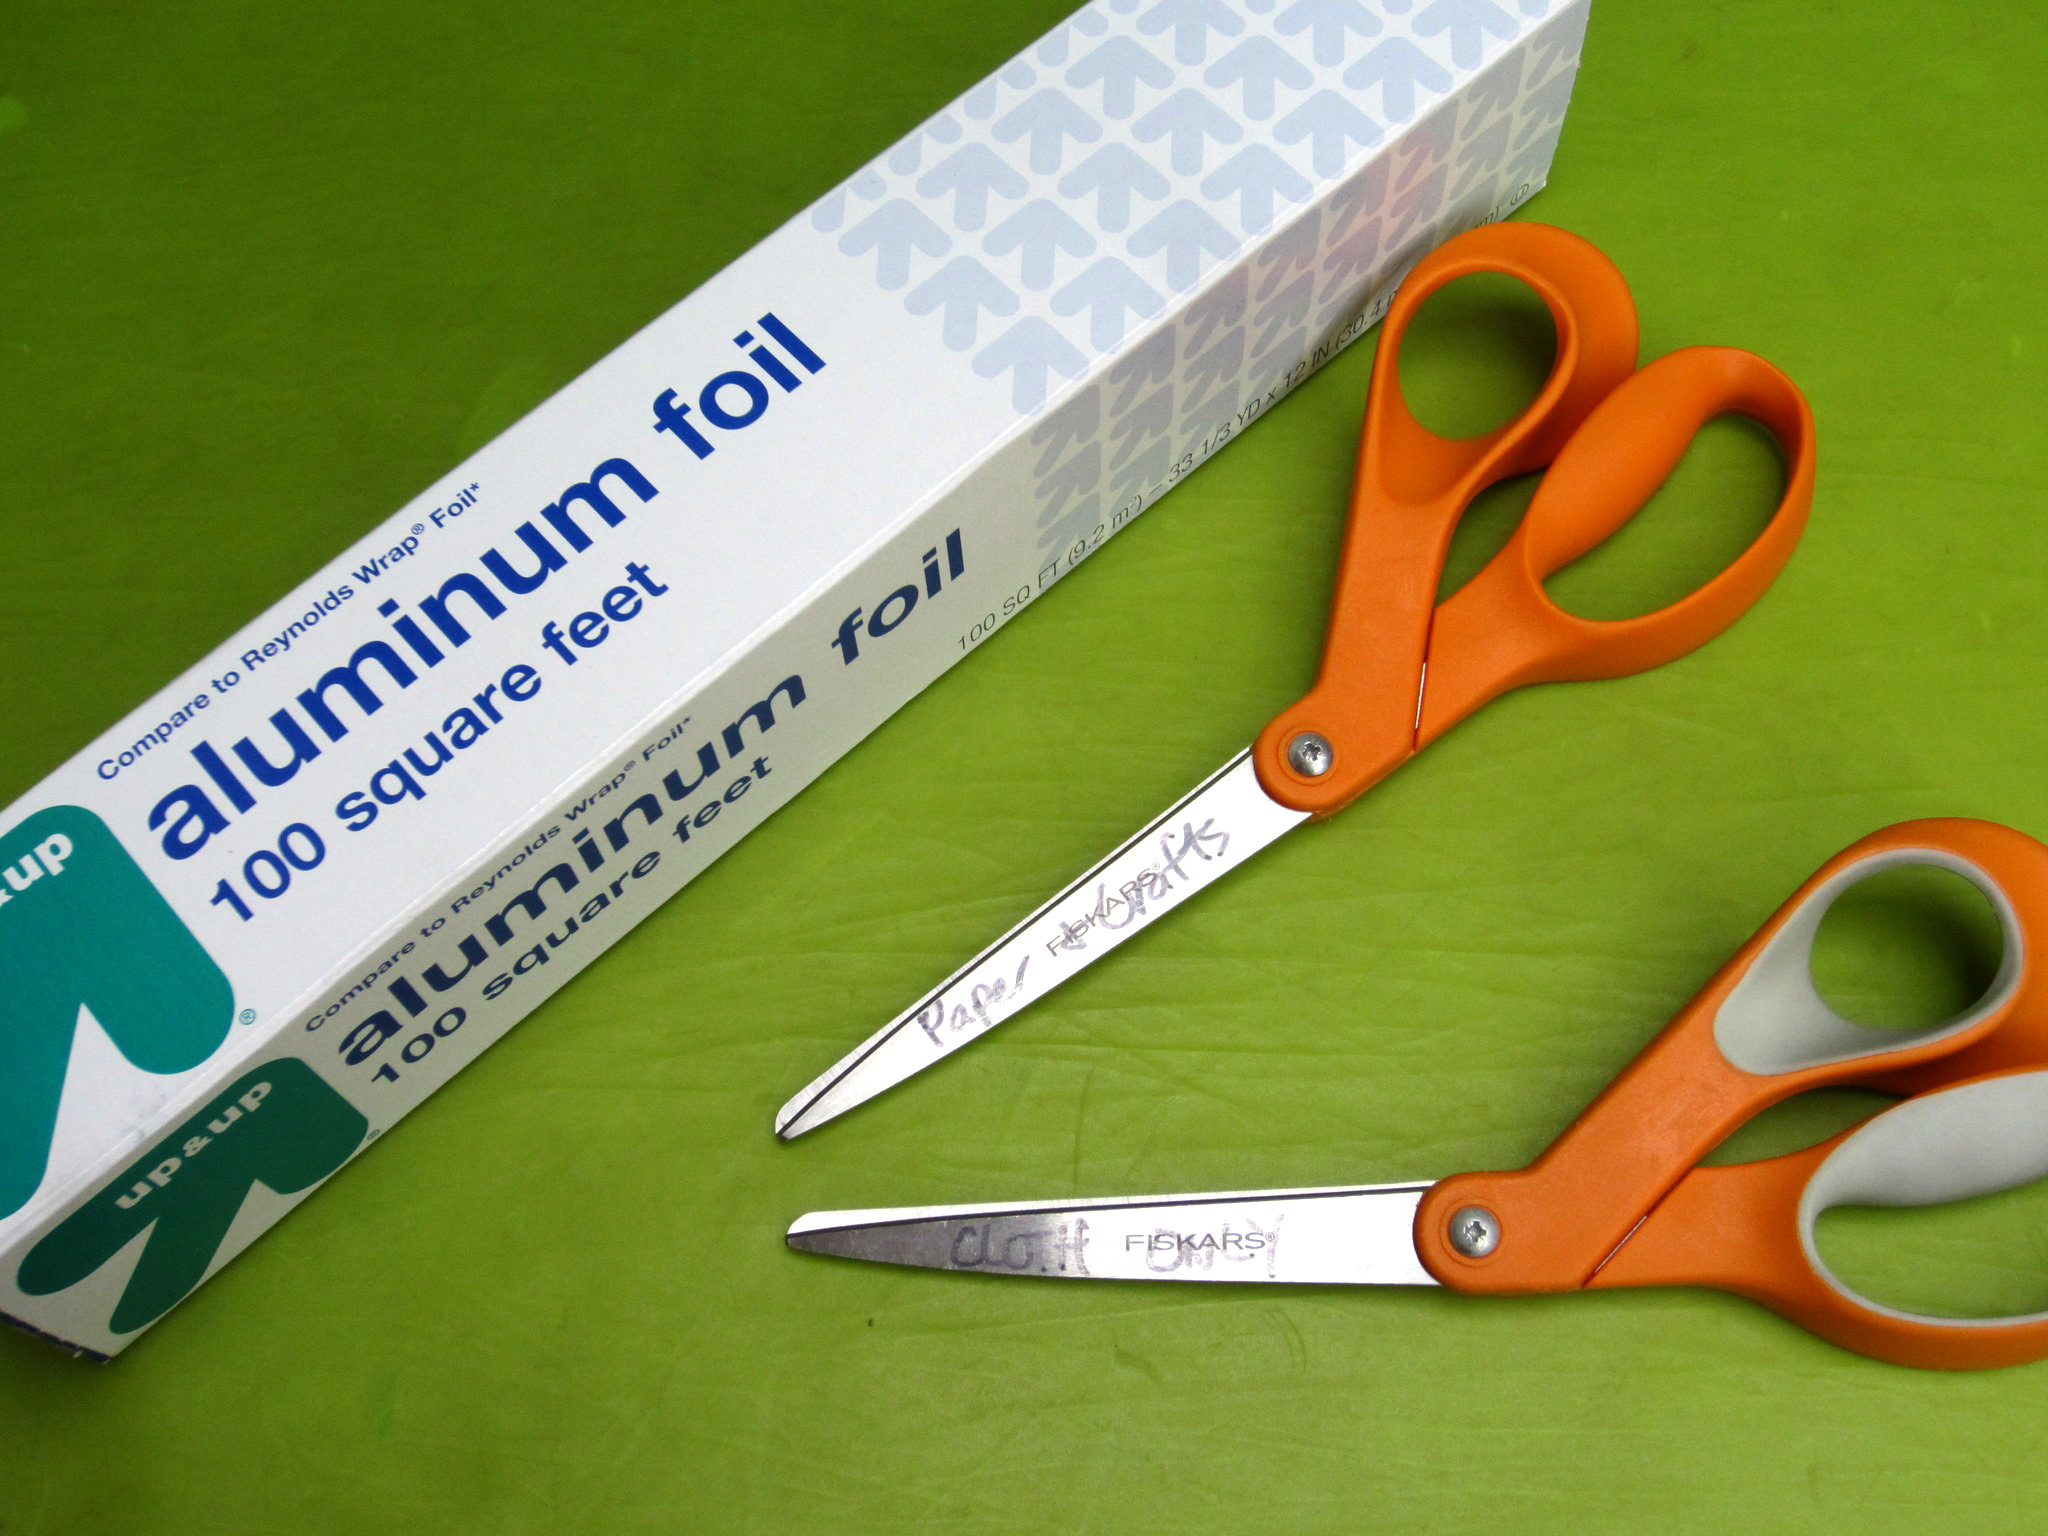 Sharp Scissors, Smooth Cuts: How to Sharpen Your Scissors at Home